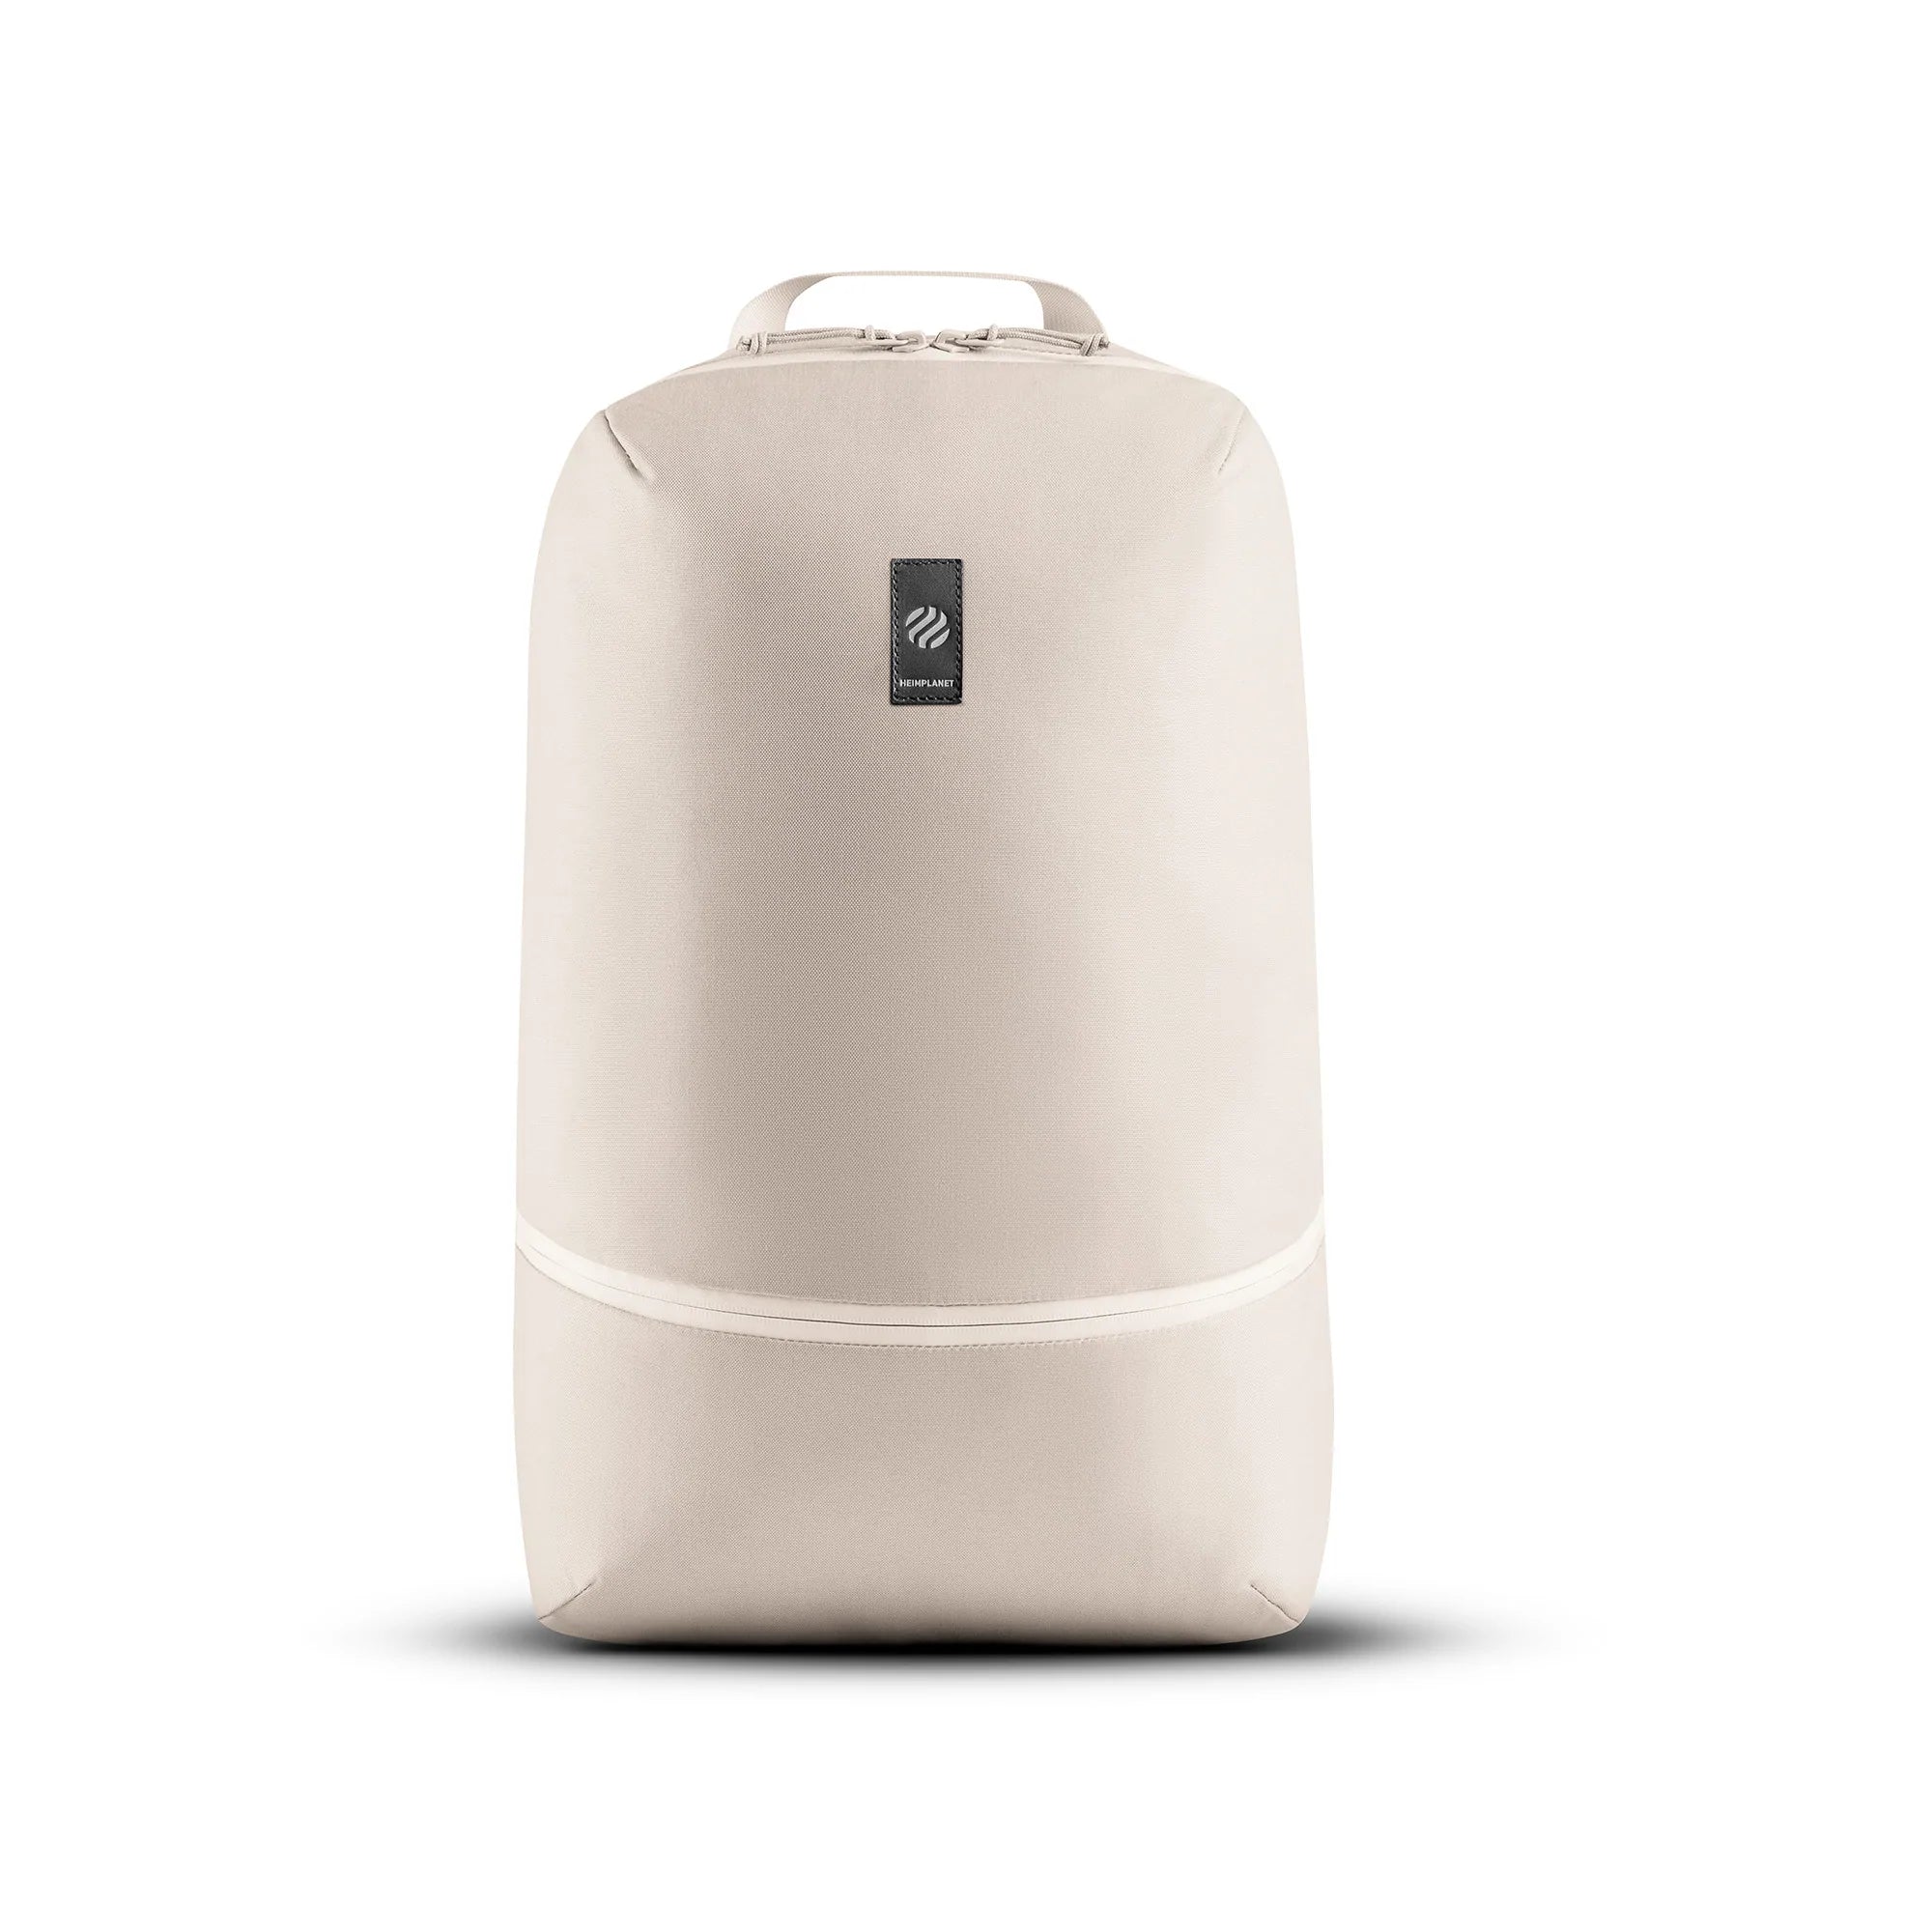 MONOLITH MINIMAL PACK 18L, FEATHER GREY - Fjord